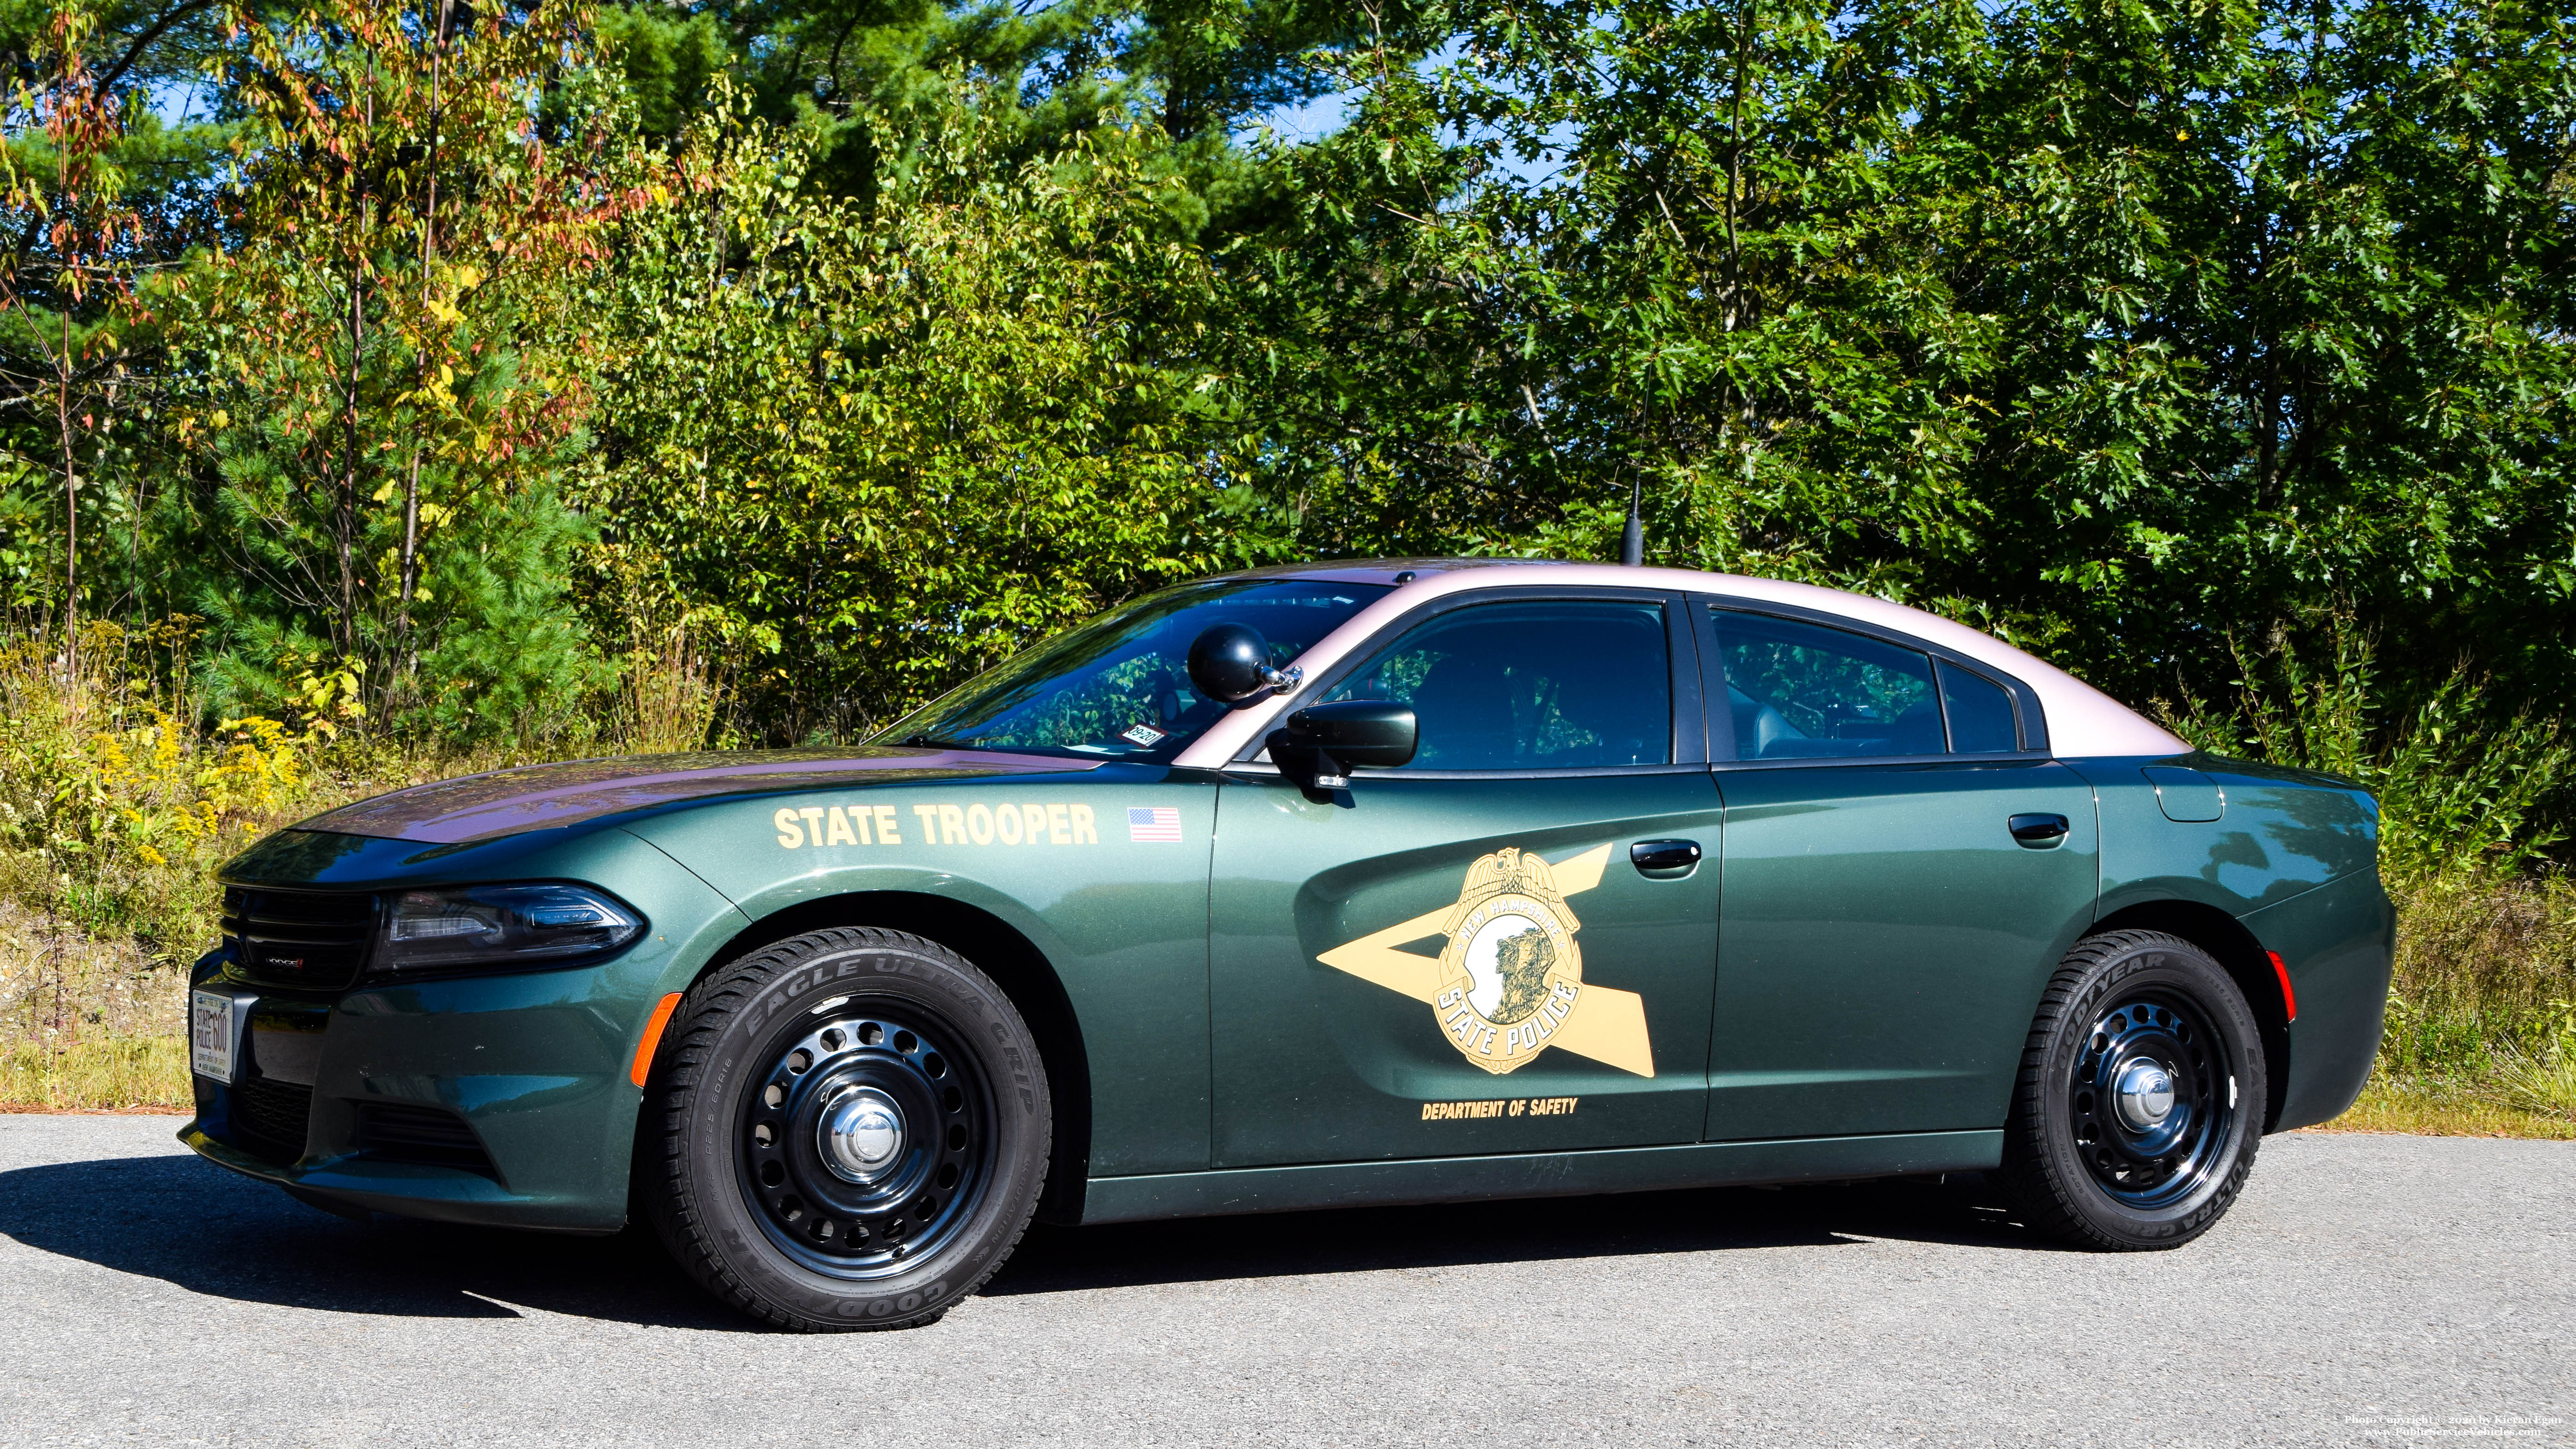 A photo  of New Hampshire State Police
            Cruiser 600, a 2017 Dodge Charger             taken by Kieran Egan